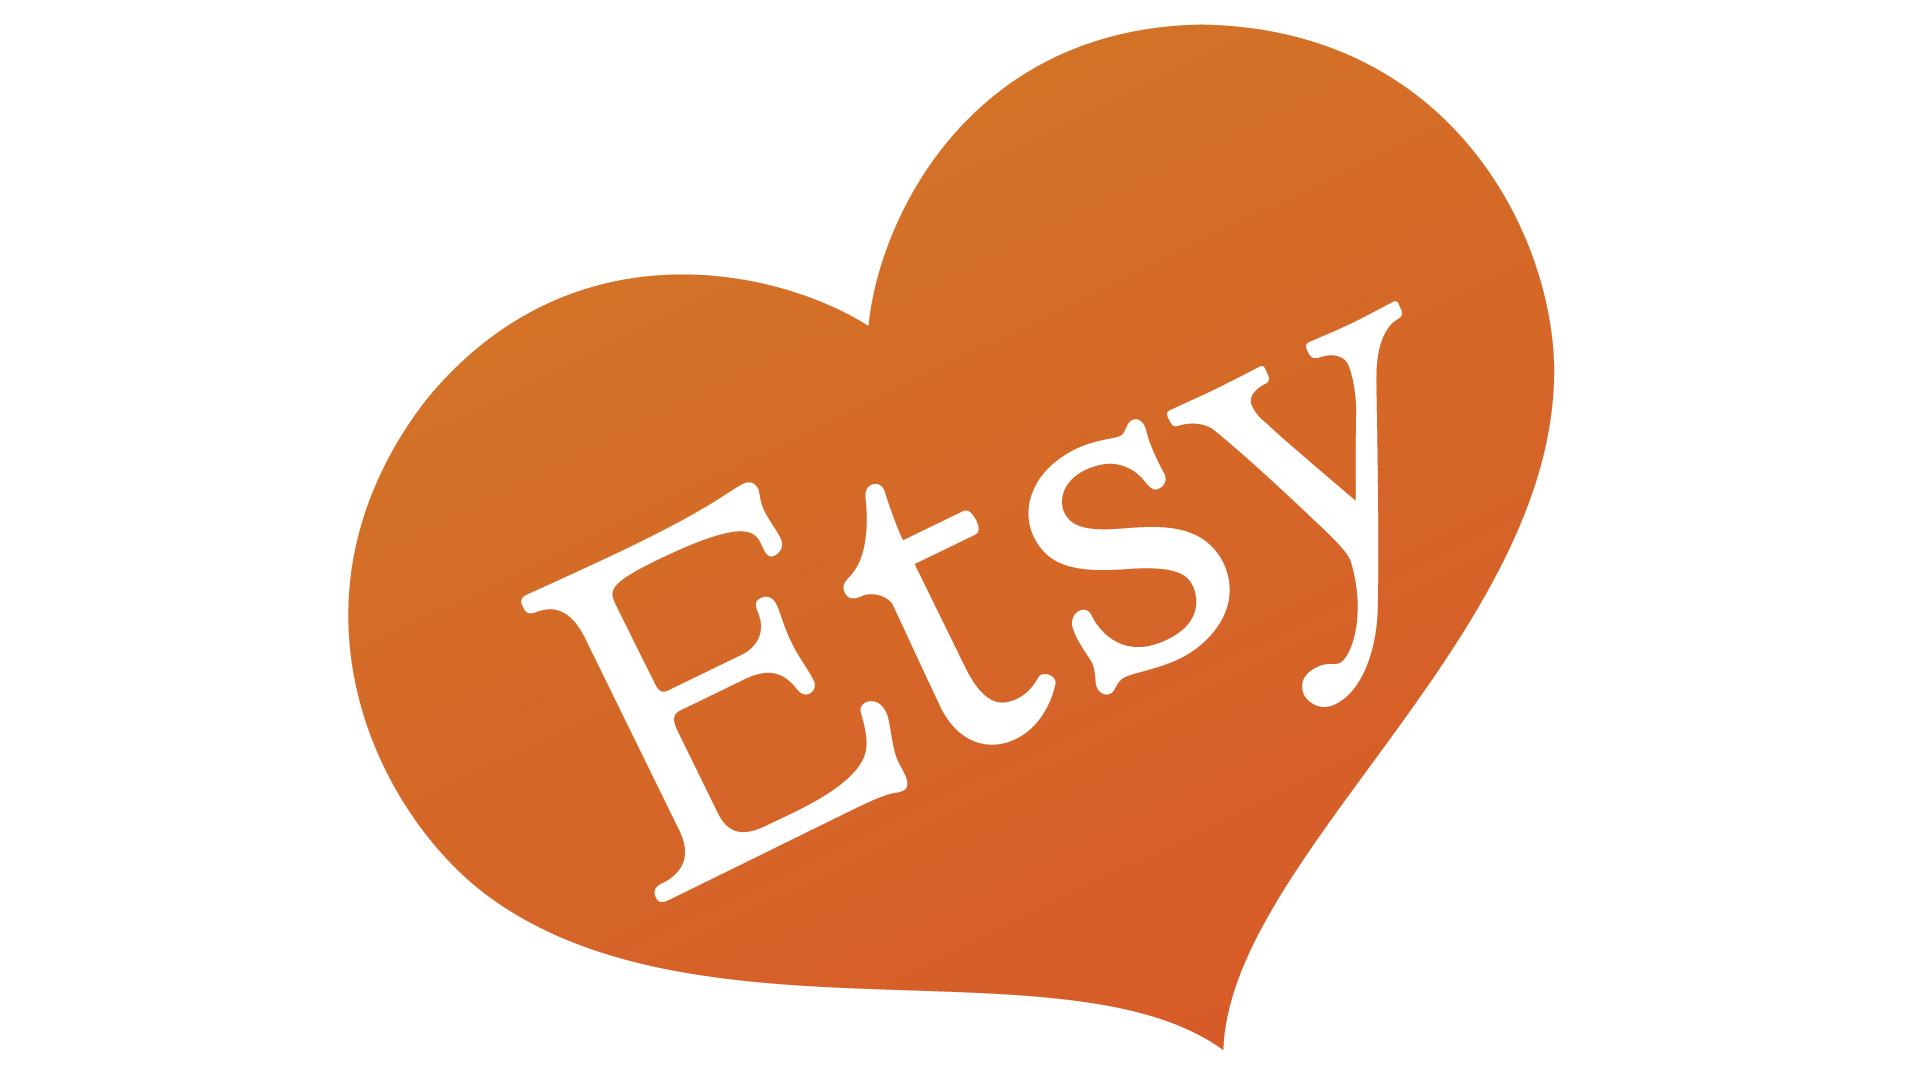 how to make money on etsy as an interior designer